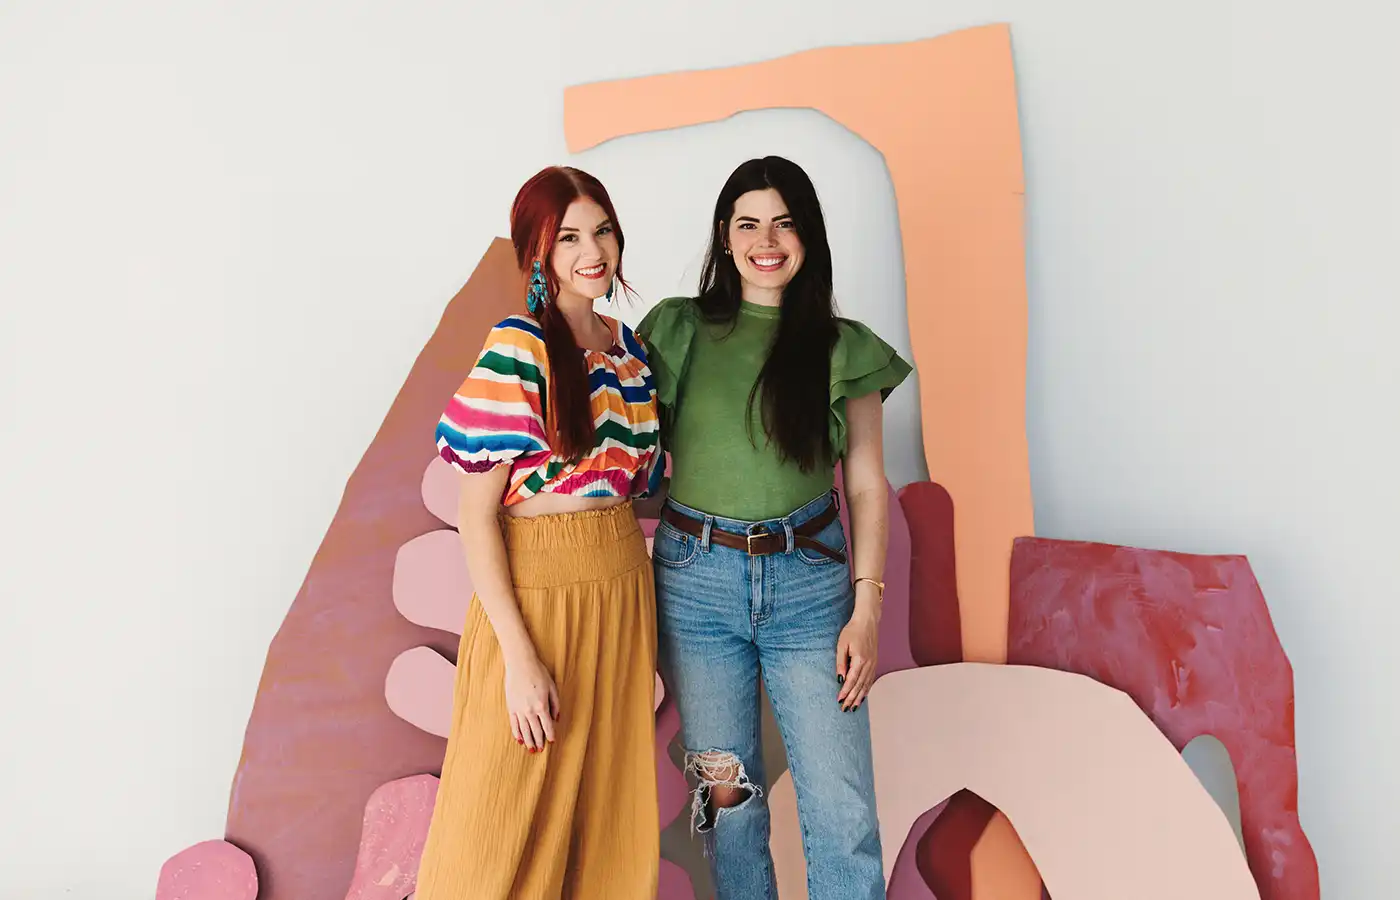 Marina Williams and Ashley Isenhour are the Co-founders and creative minds behind Colorpop, a nationally renowned weekend retreat for photographers of all skill levels.